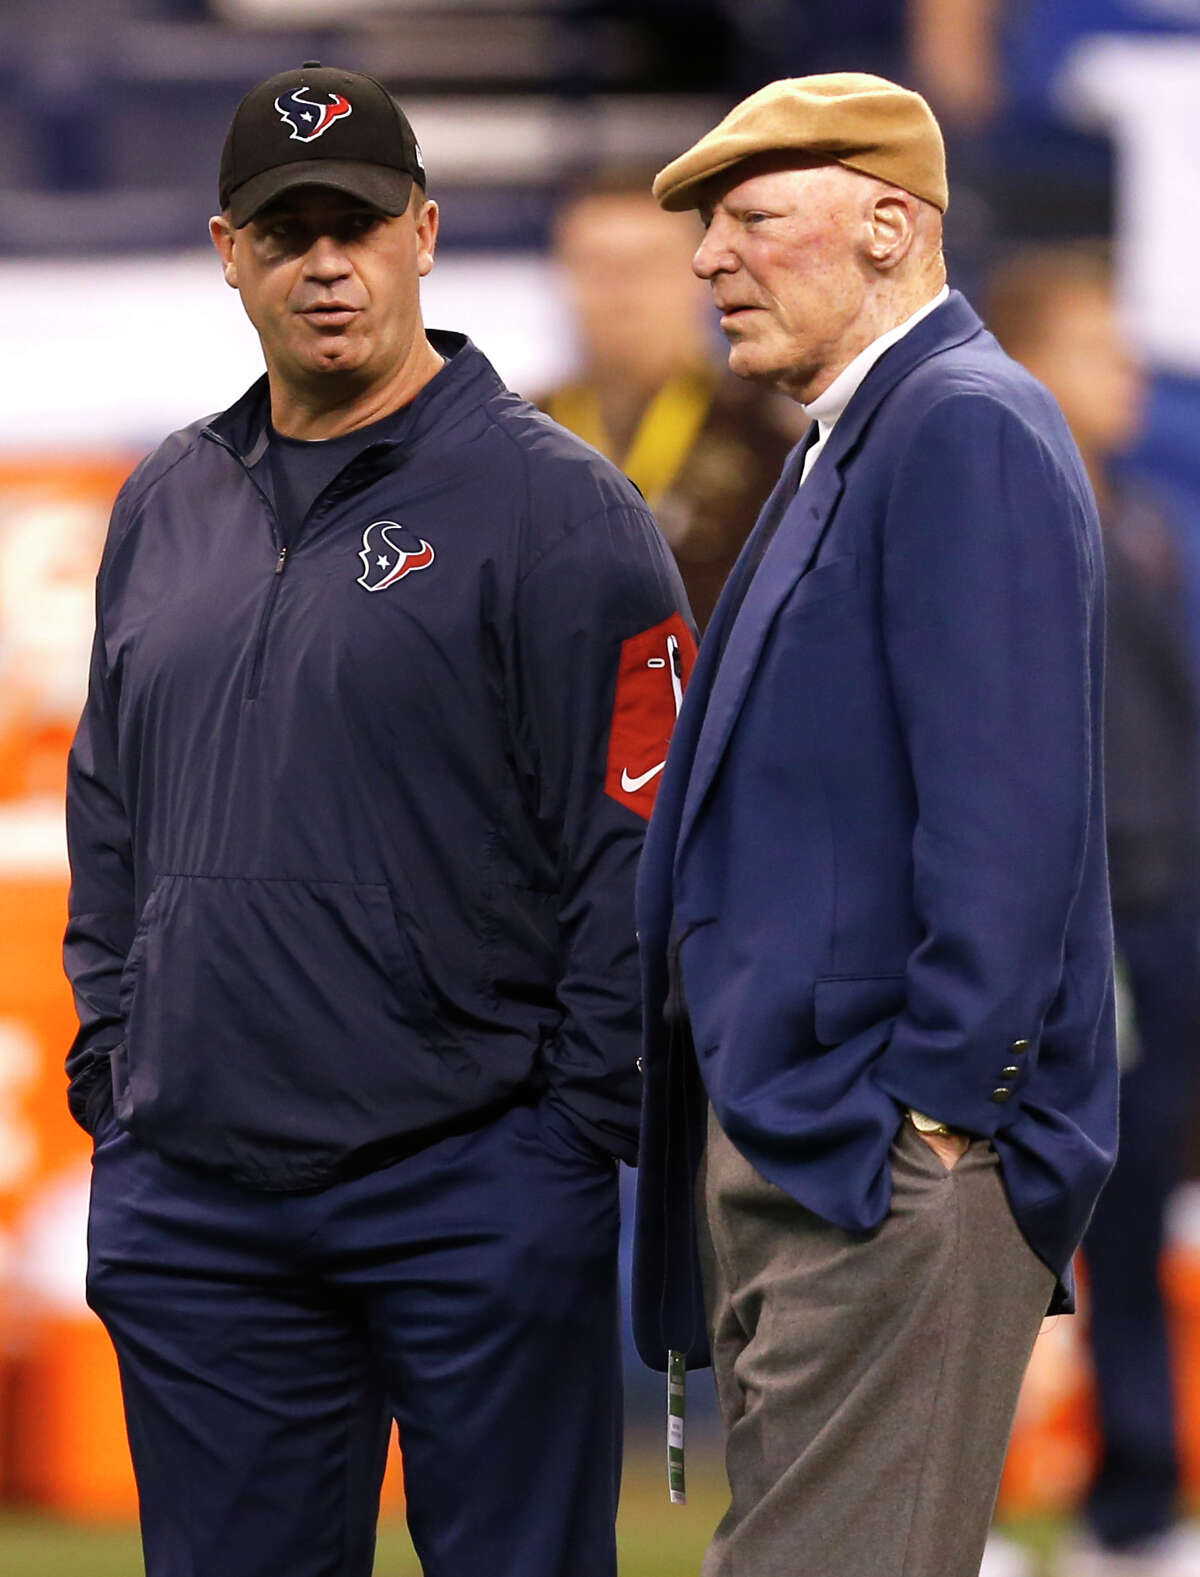 Following last week's playoff victory, Texans owner Bob McNair, right, responded to national media reports about coach Bill O'Brien's job security by saying he would return for the 2017 season.